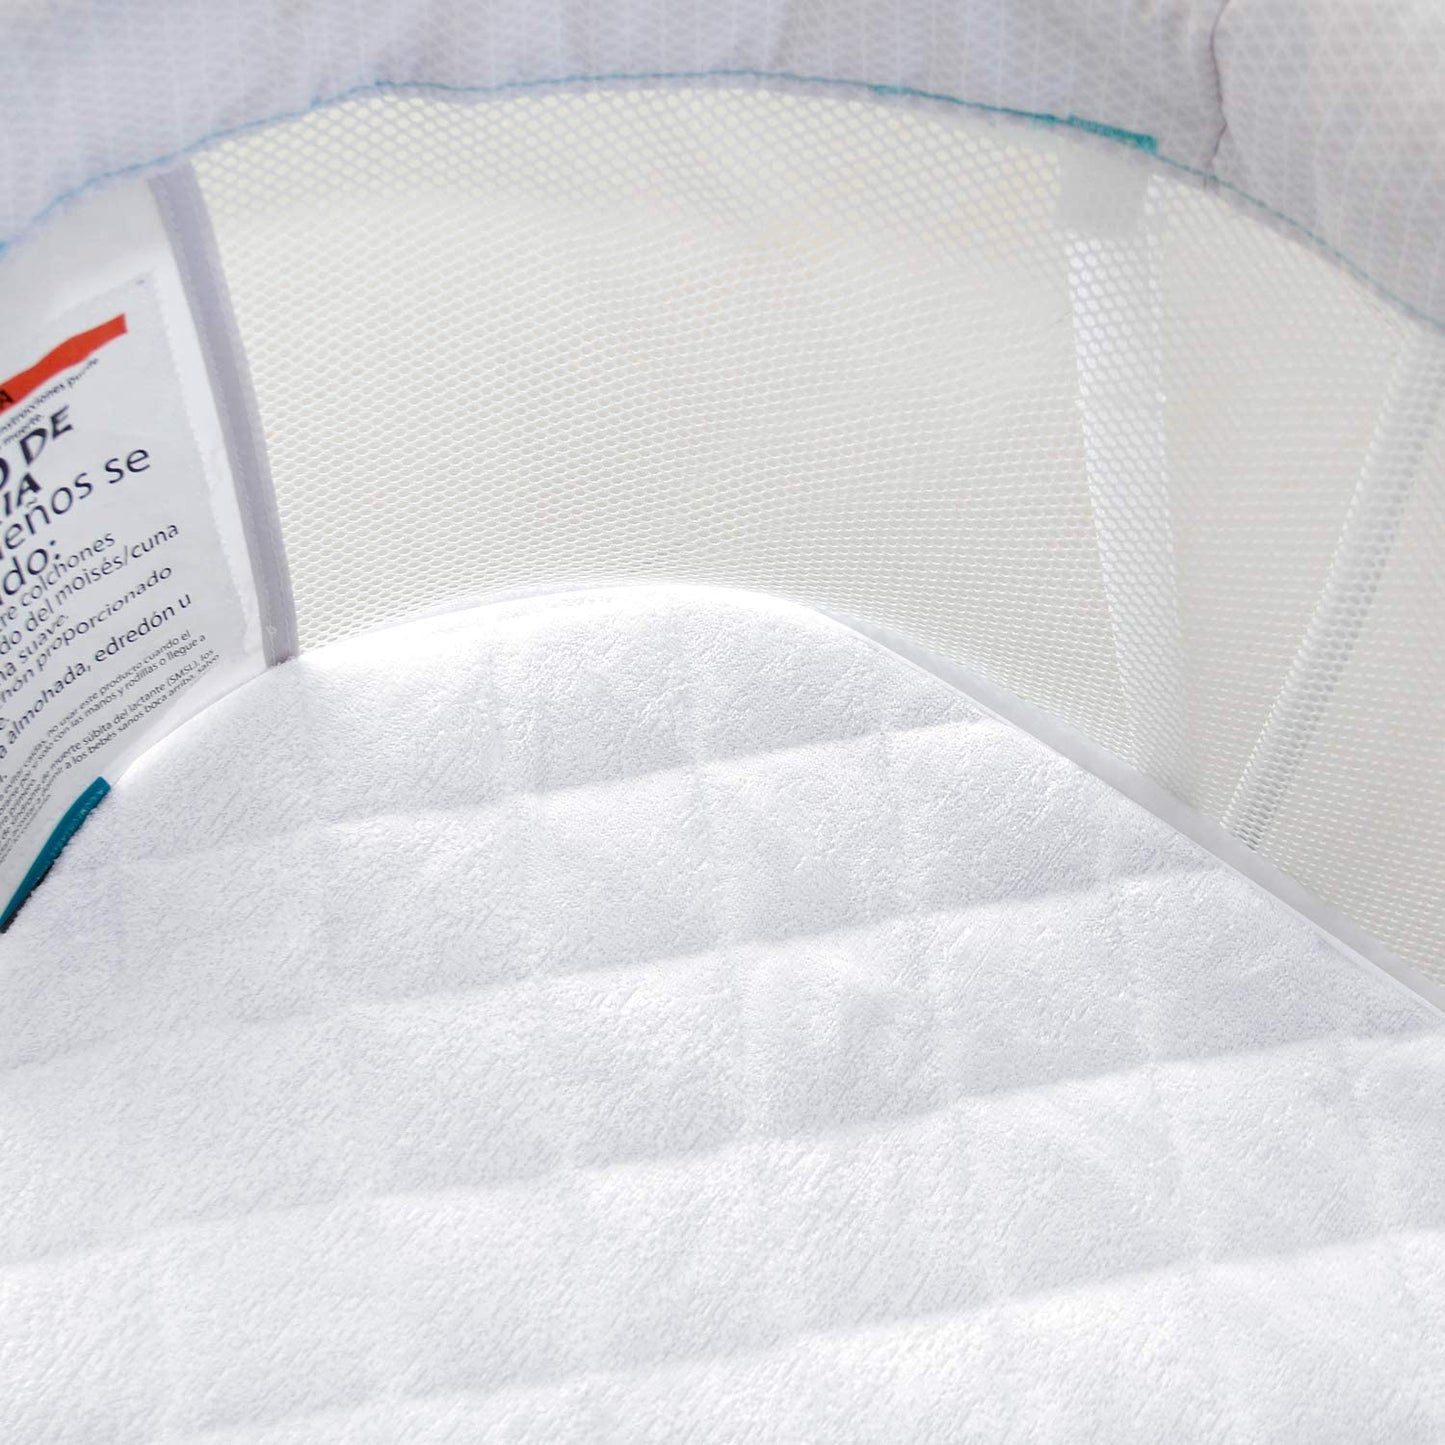 Bassinet Mattress Pad Cover - Fits Dream On Me Karley Bassinet, 2 Pack, Bamboo, Waterproof